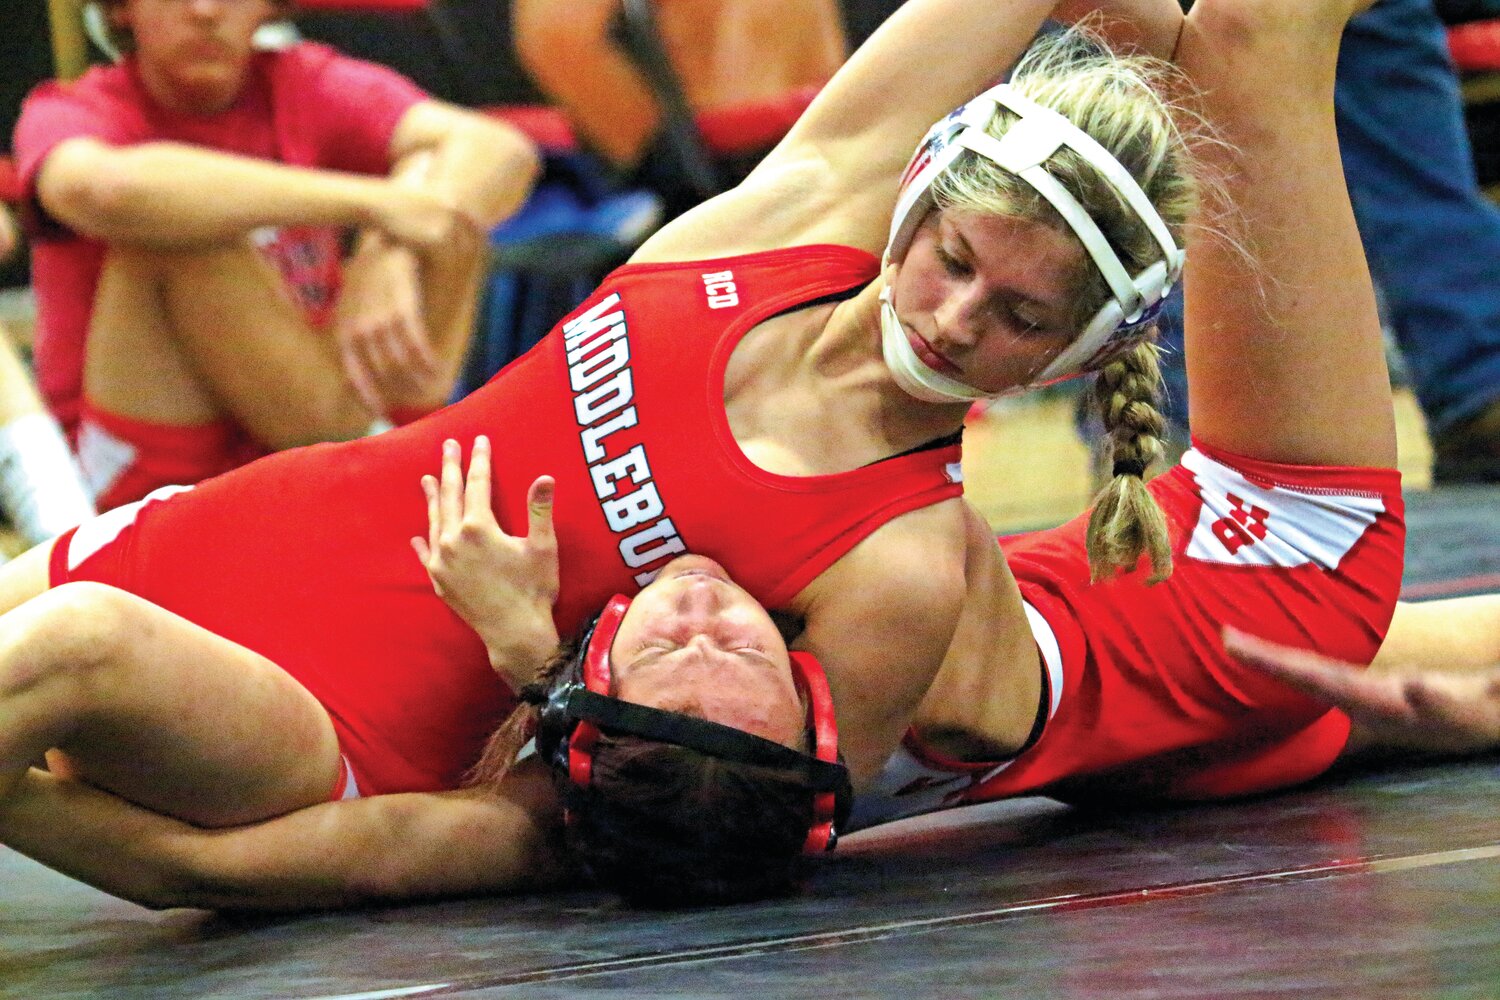 Middleburg wrestler Lilly Bradshaw follows the state-meet footsteps of big sister Gracie into the 2023 season with a list of new moves on the mat.